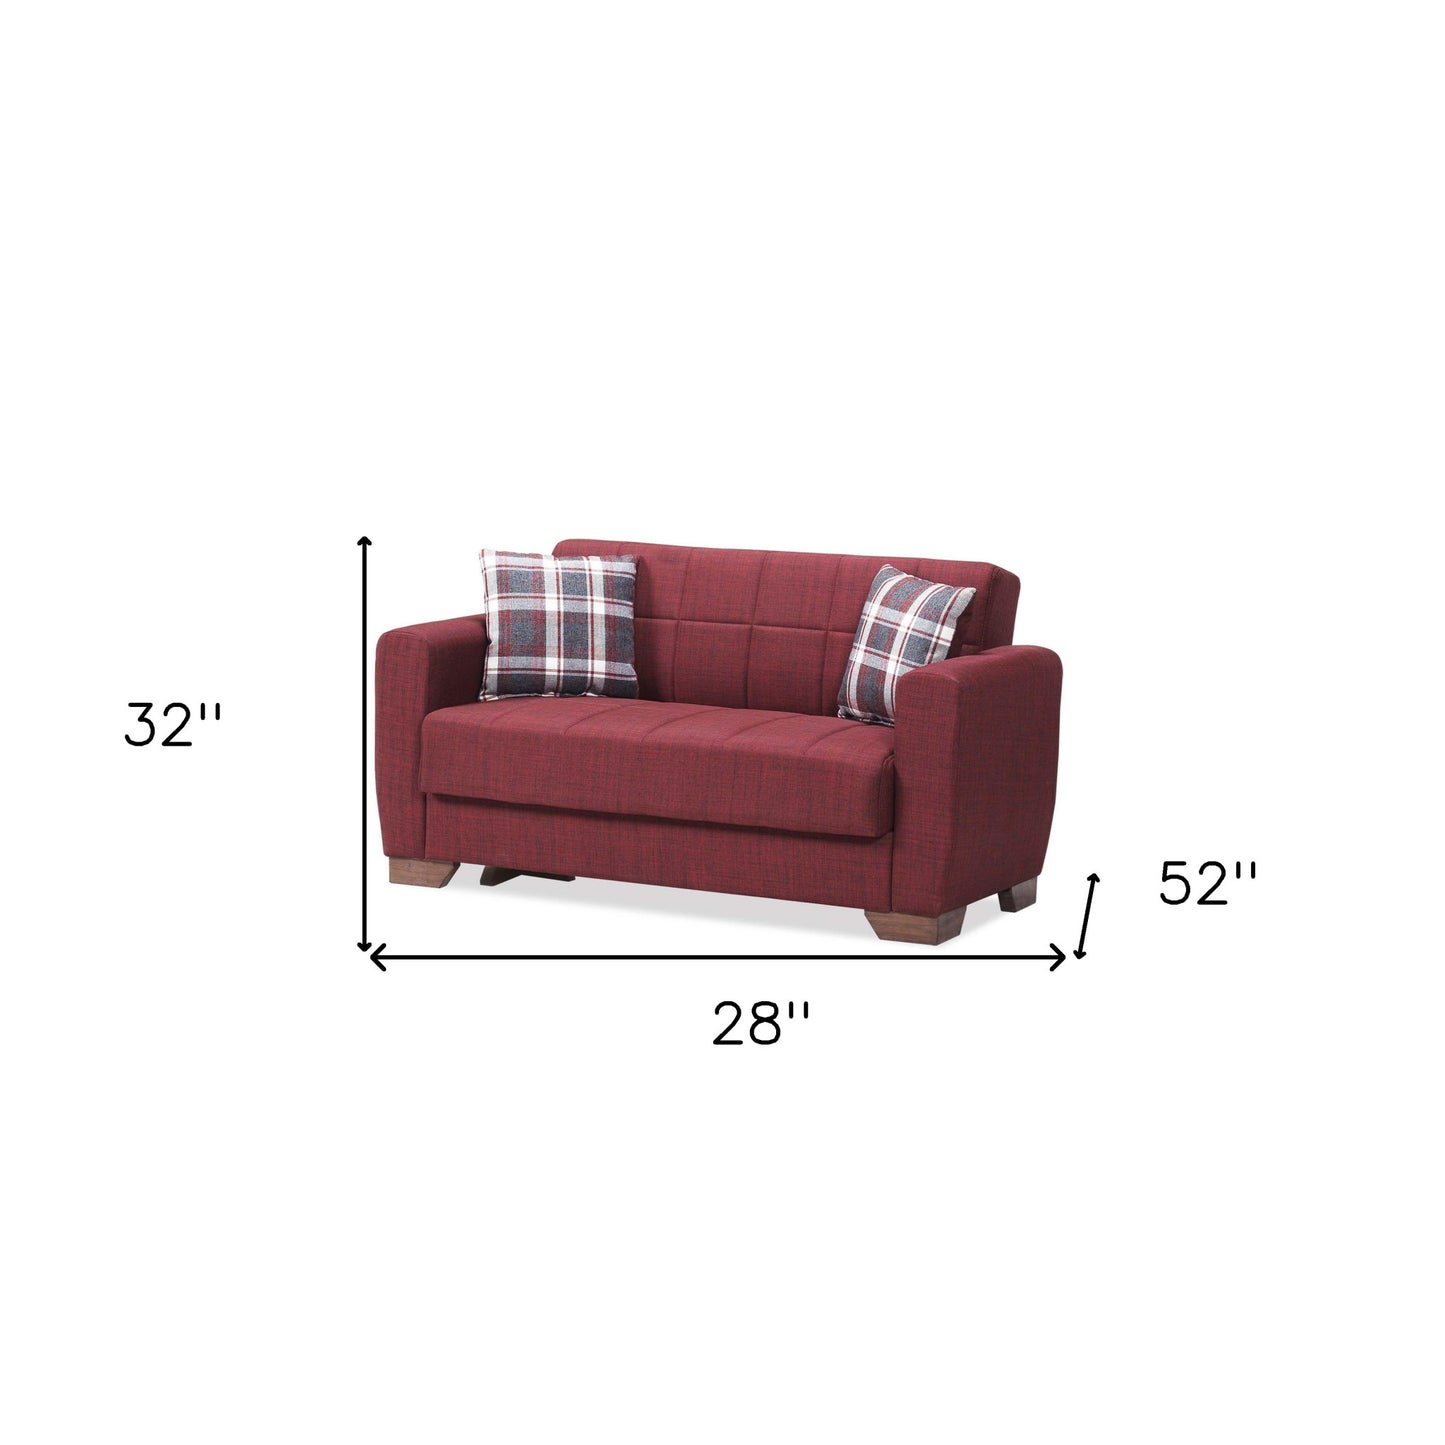 52" Burgundy Brown Chenille Futon Convertible Sleeper Love Seat With Storage And Toss Pillows